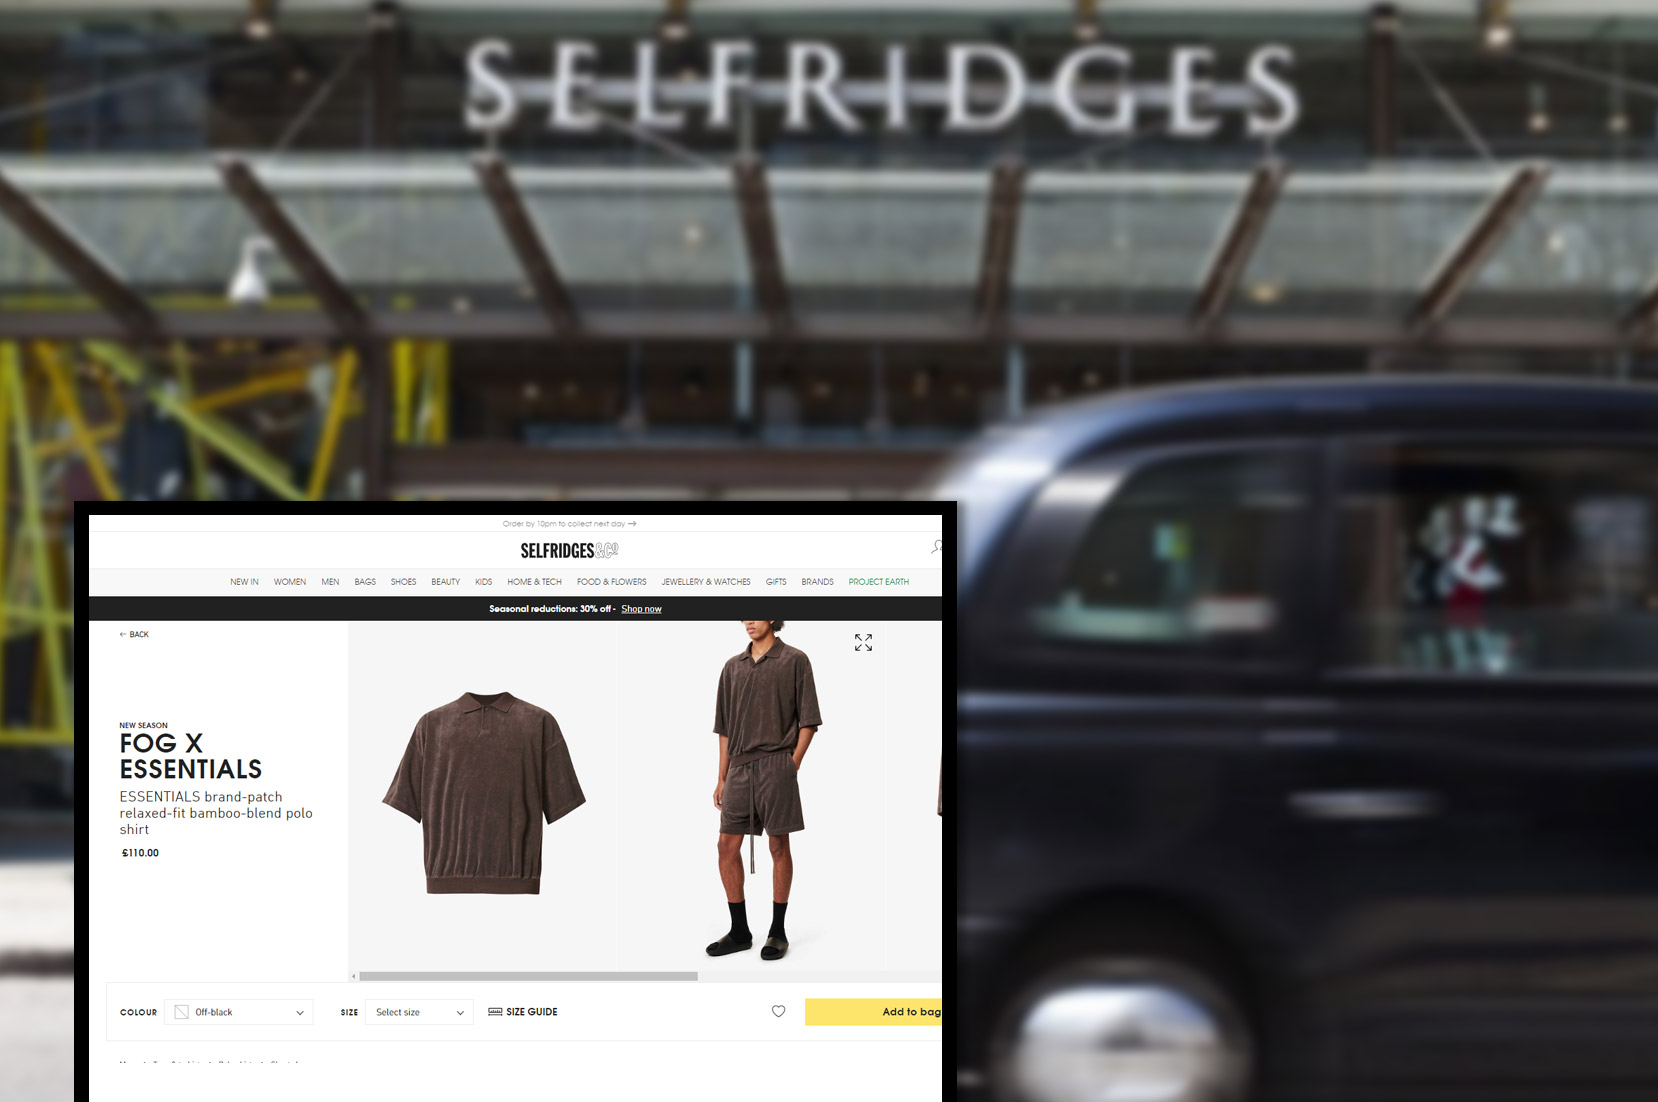 selfridges-comproduct-pricing-information-and-image-scraping-services